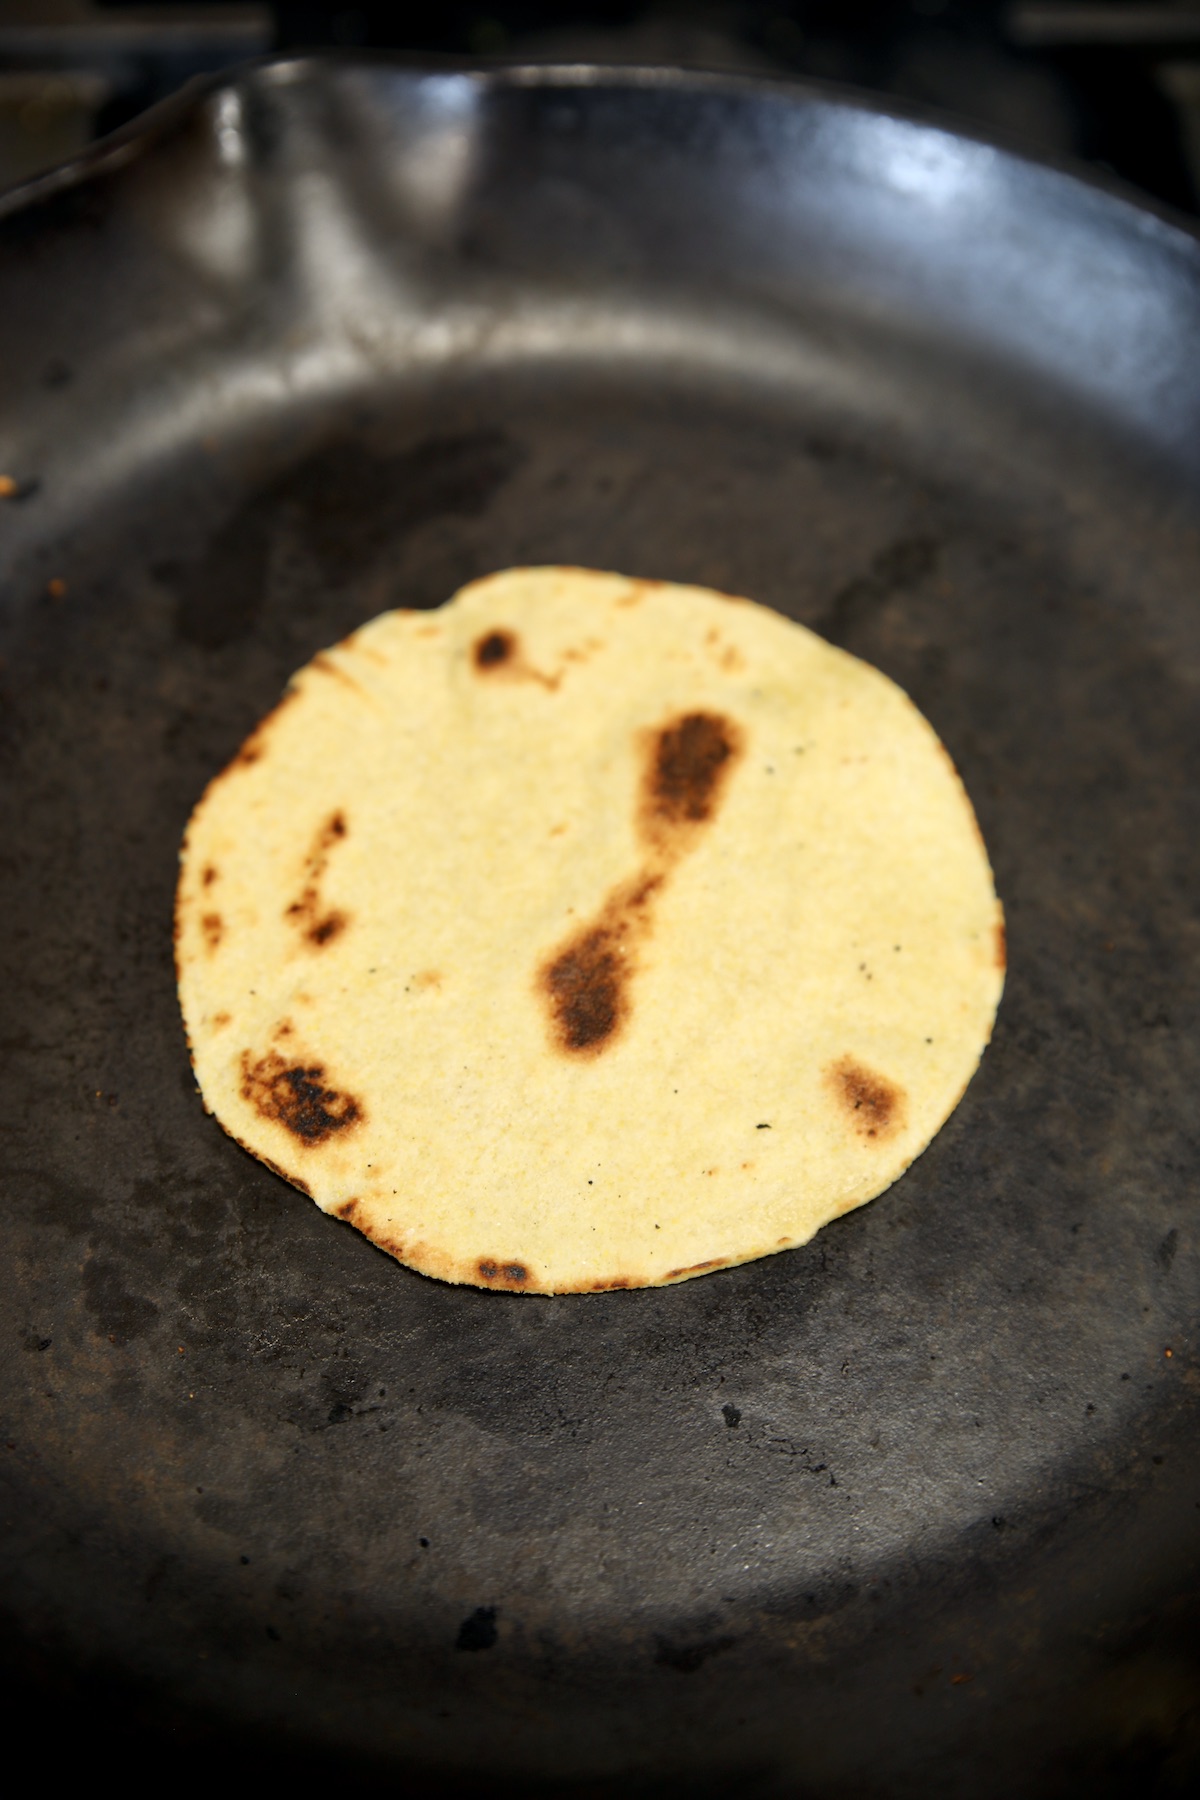 Cooking tortilla in a skillet.